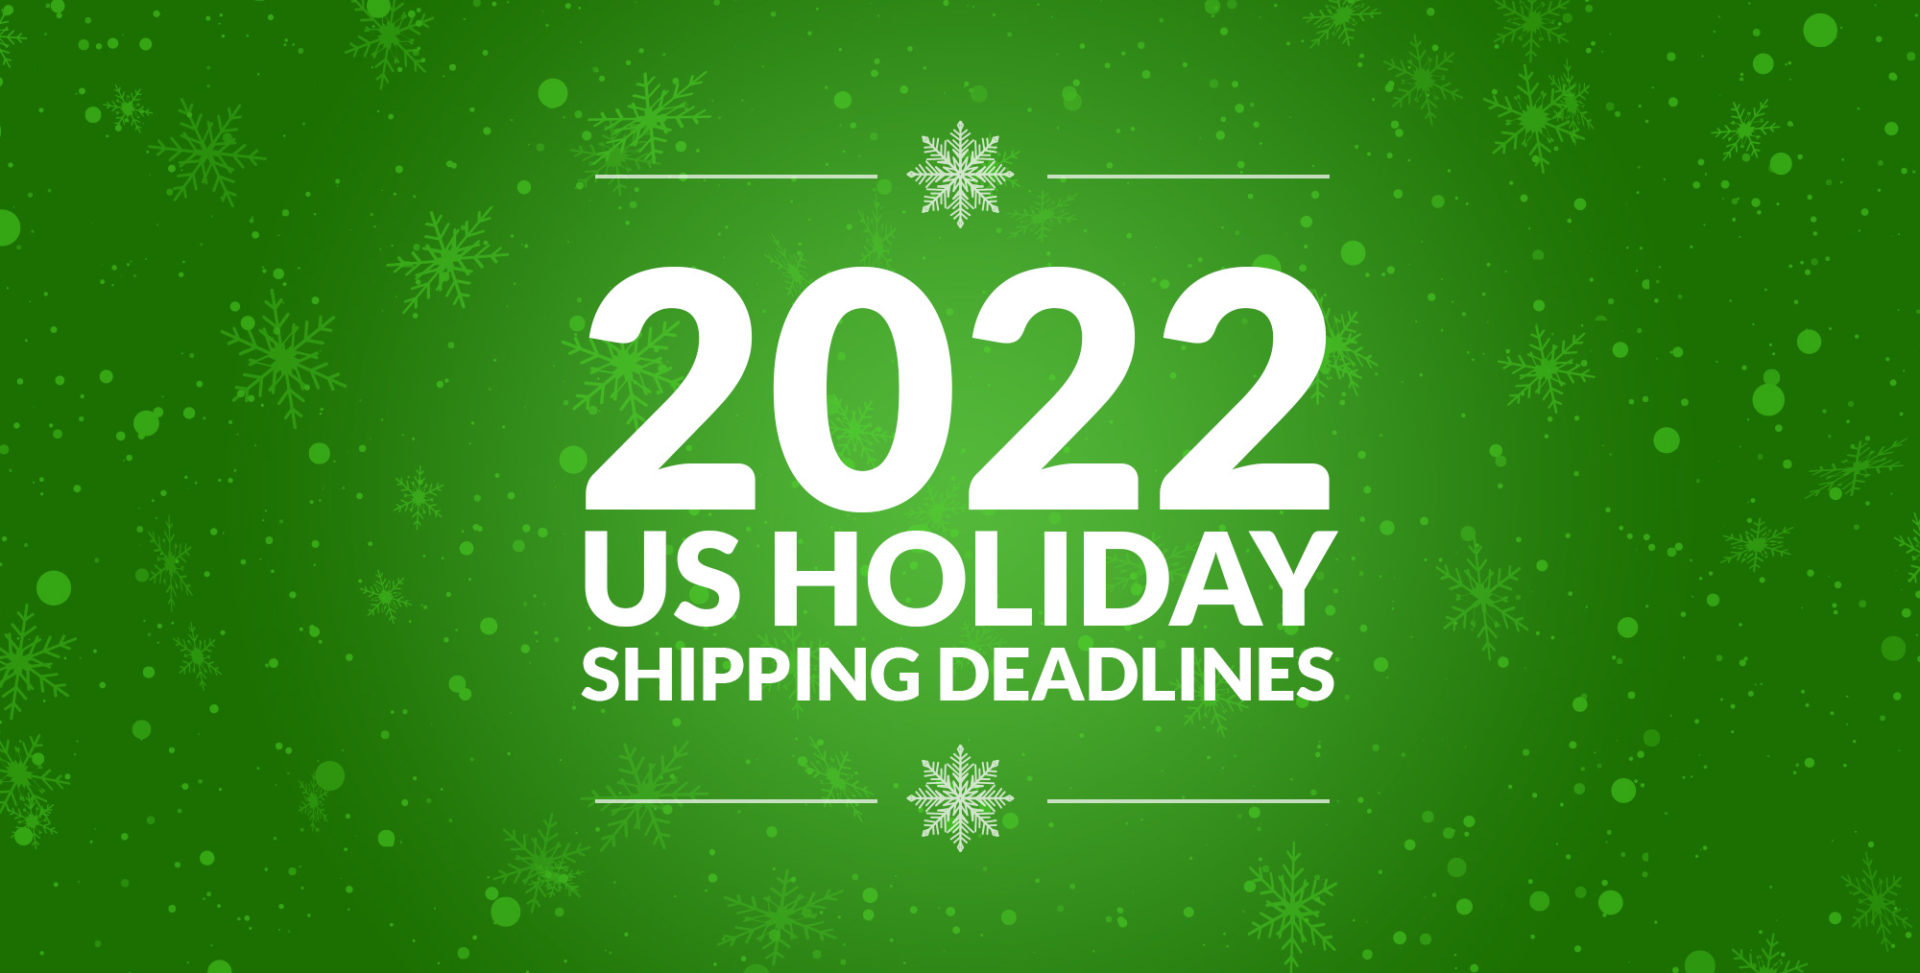 Get prepared for the holiday season by watching our blog for the 2022 shipping deadlines.